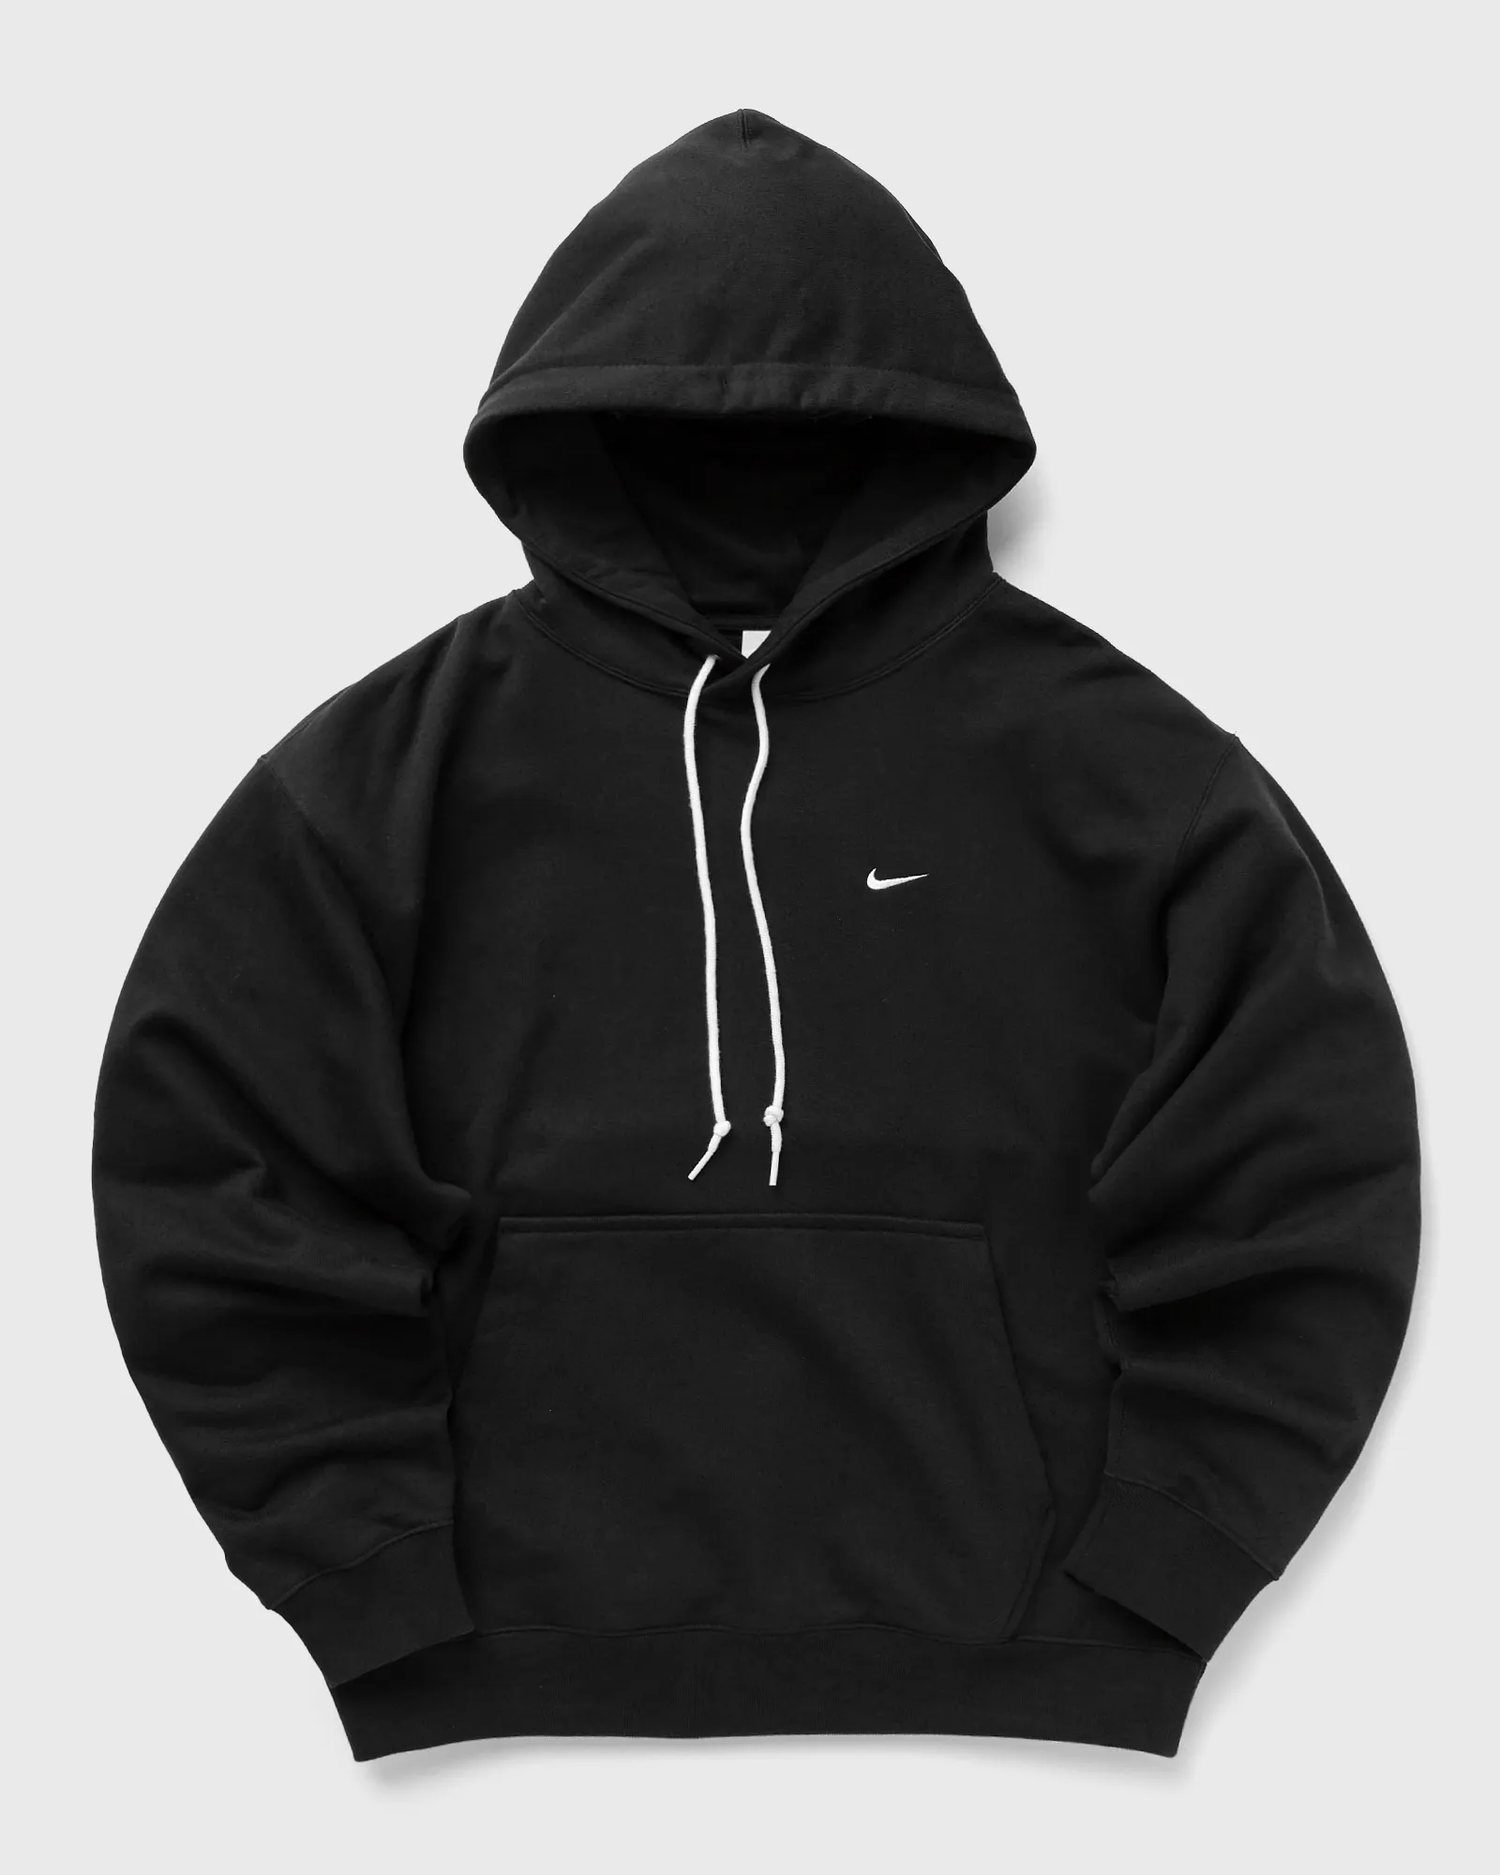 Over 50% OFF the Nike Solo Swoosh French Terry Hoodie 